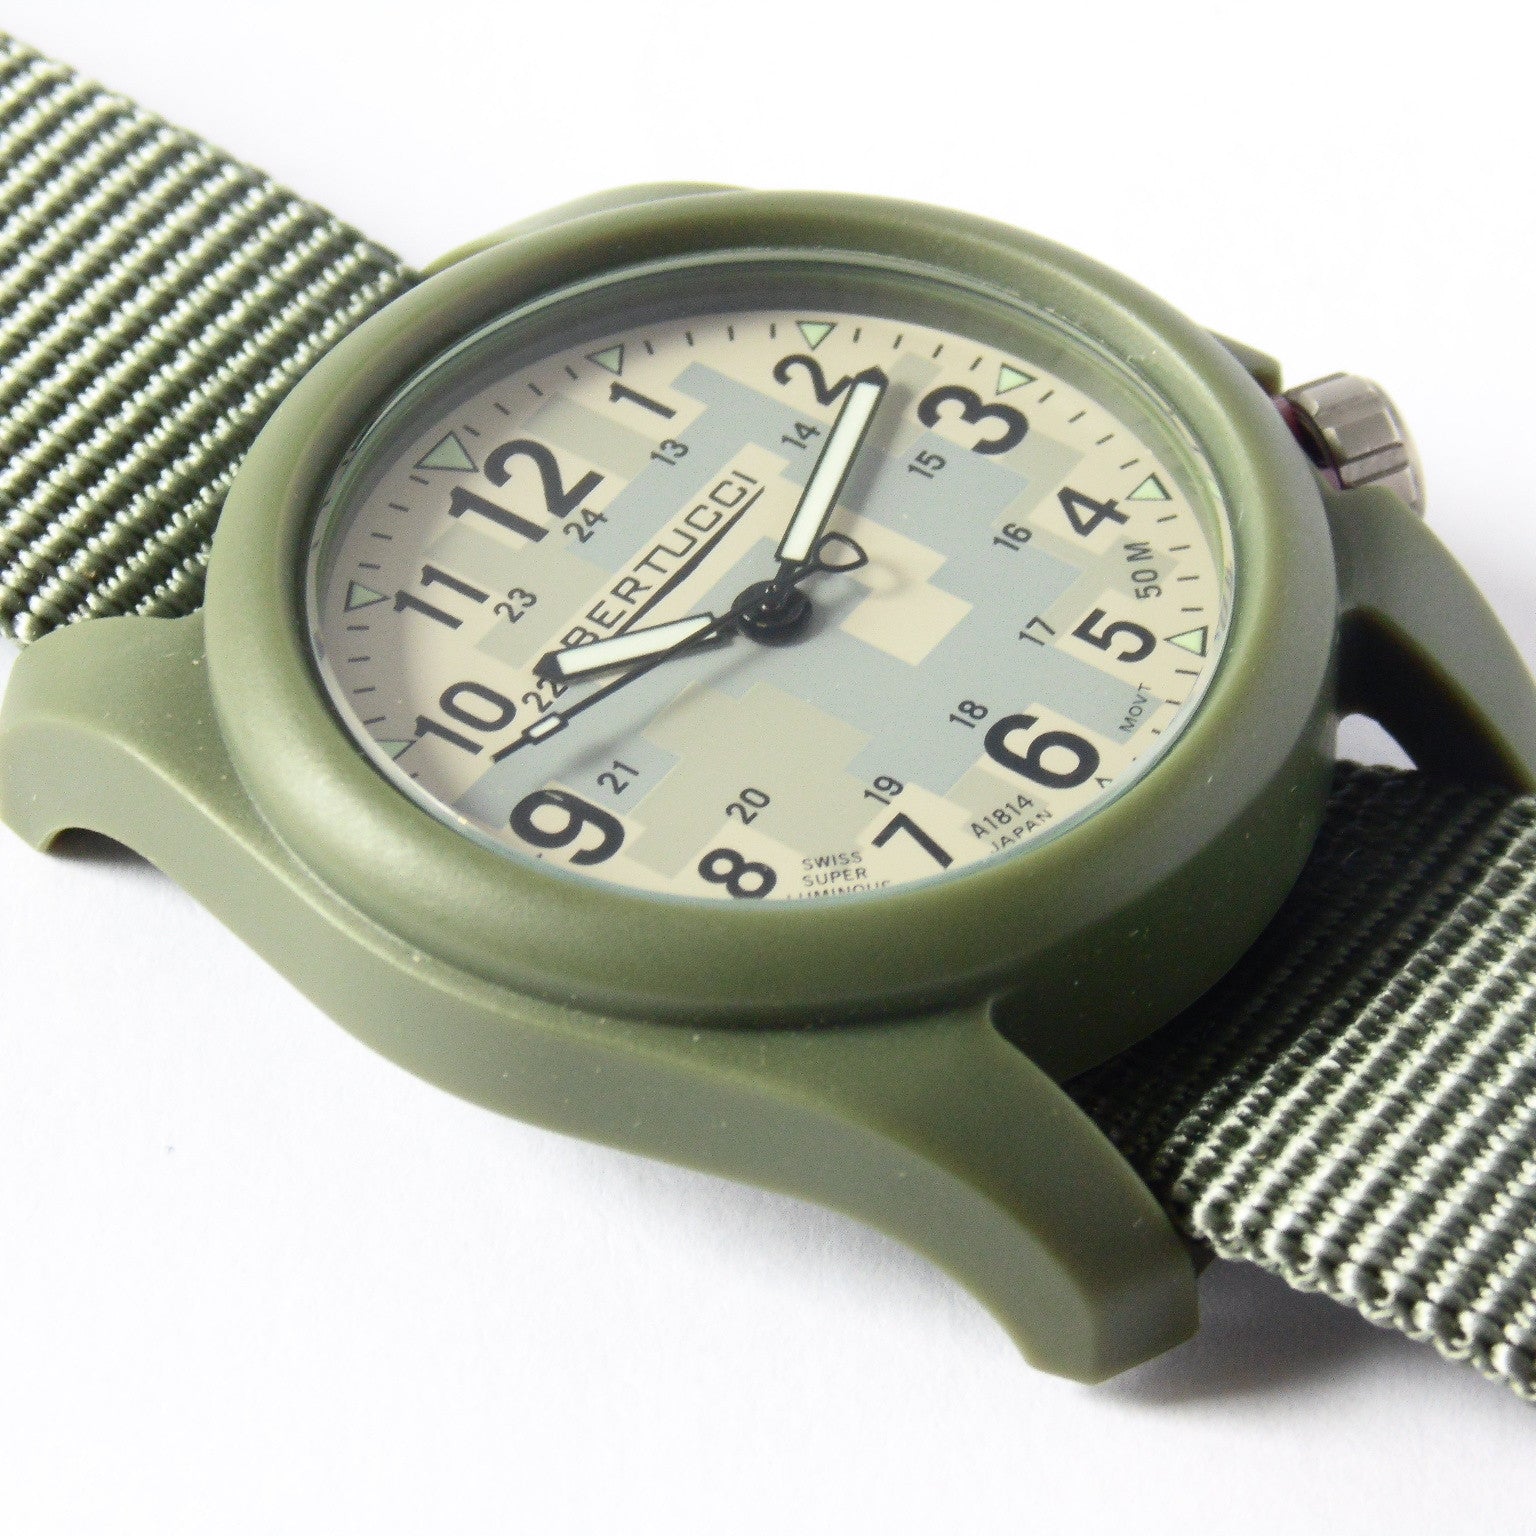 Bertucci DX3 Field Resin Watch, Olive Drab Nylon Strap, Digicam Camouflage Dial 11032 - Watchfinder General - UK suppliers of Russian Vostok Parnis Watches MWC G10
 - 3